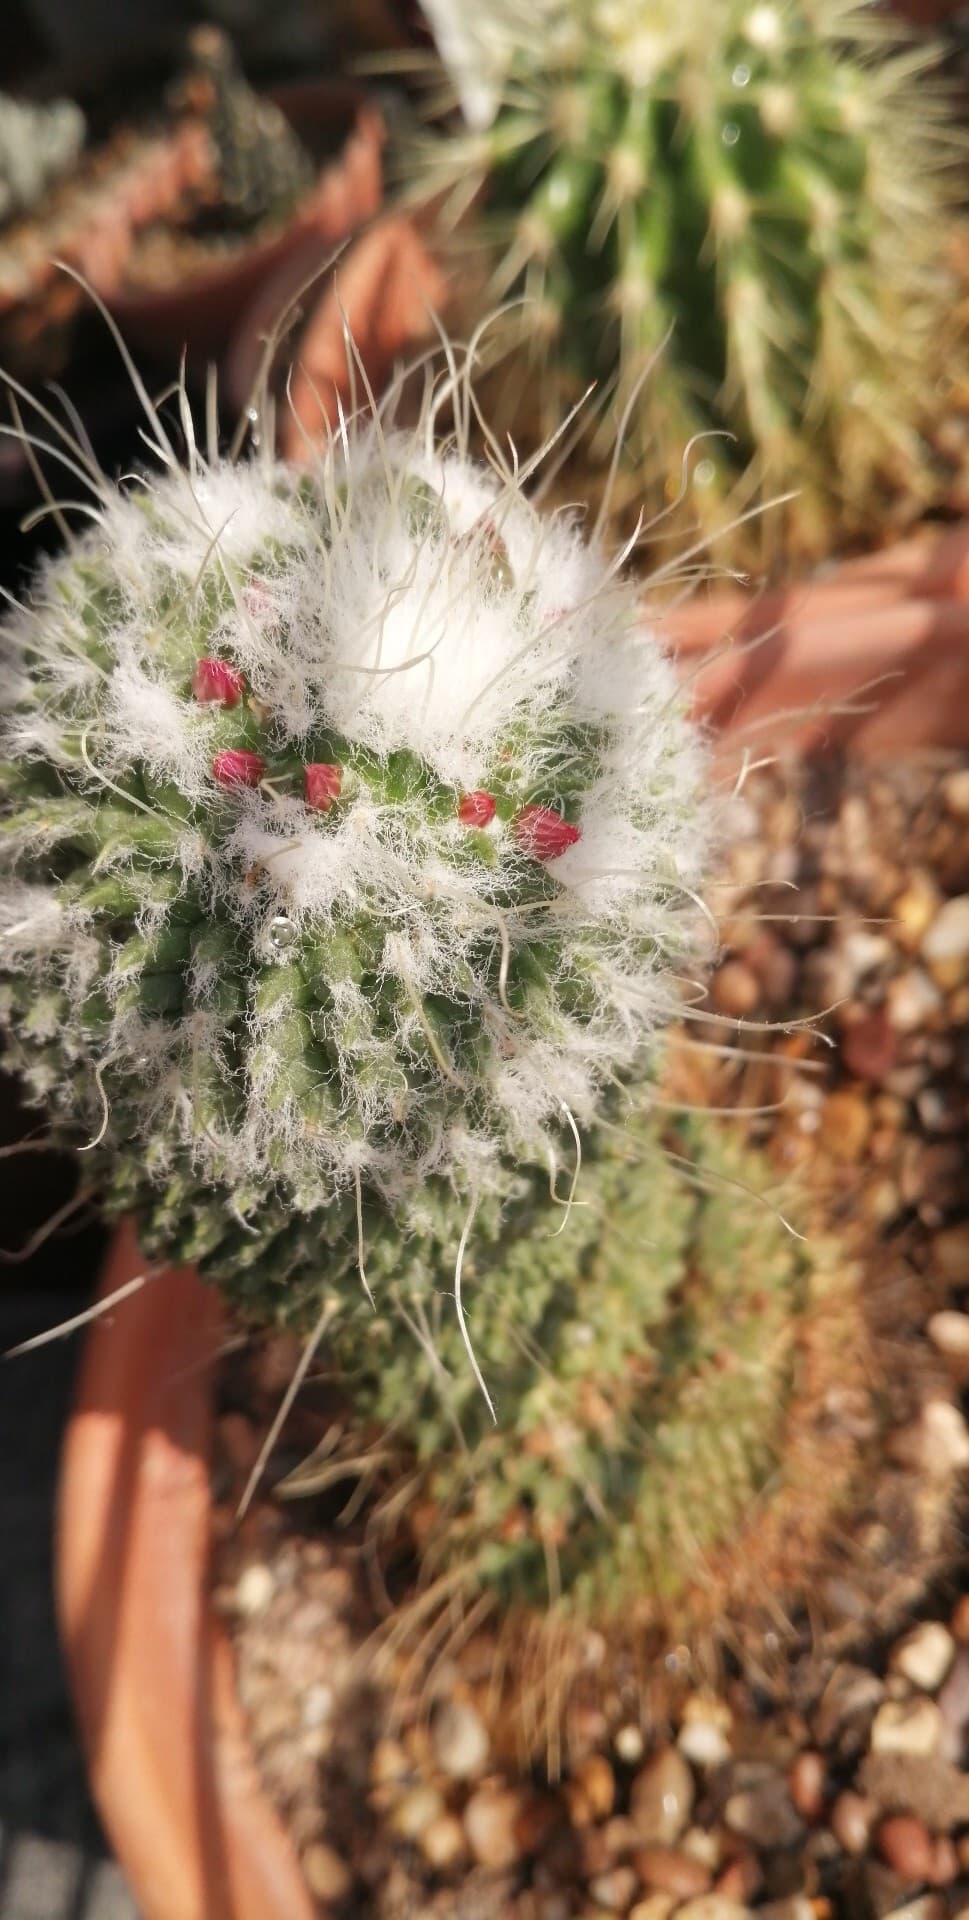 One of my cacti is flowering this year